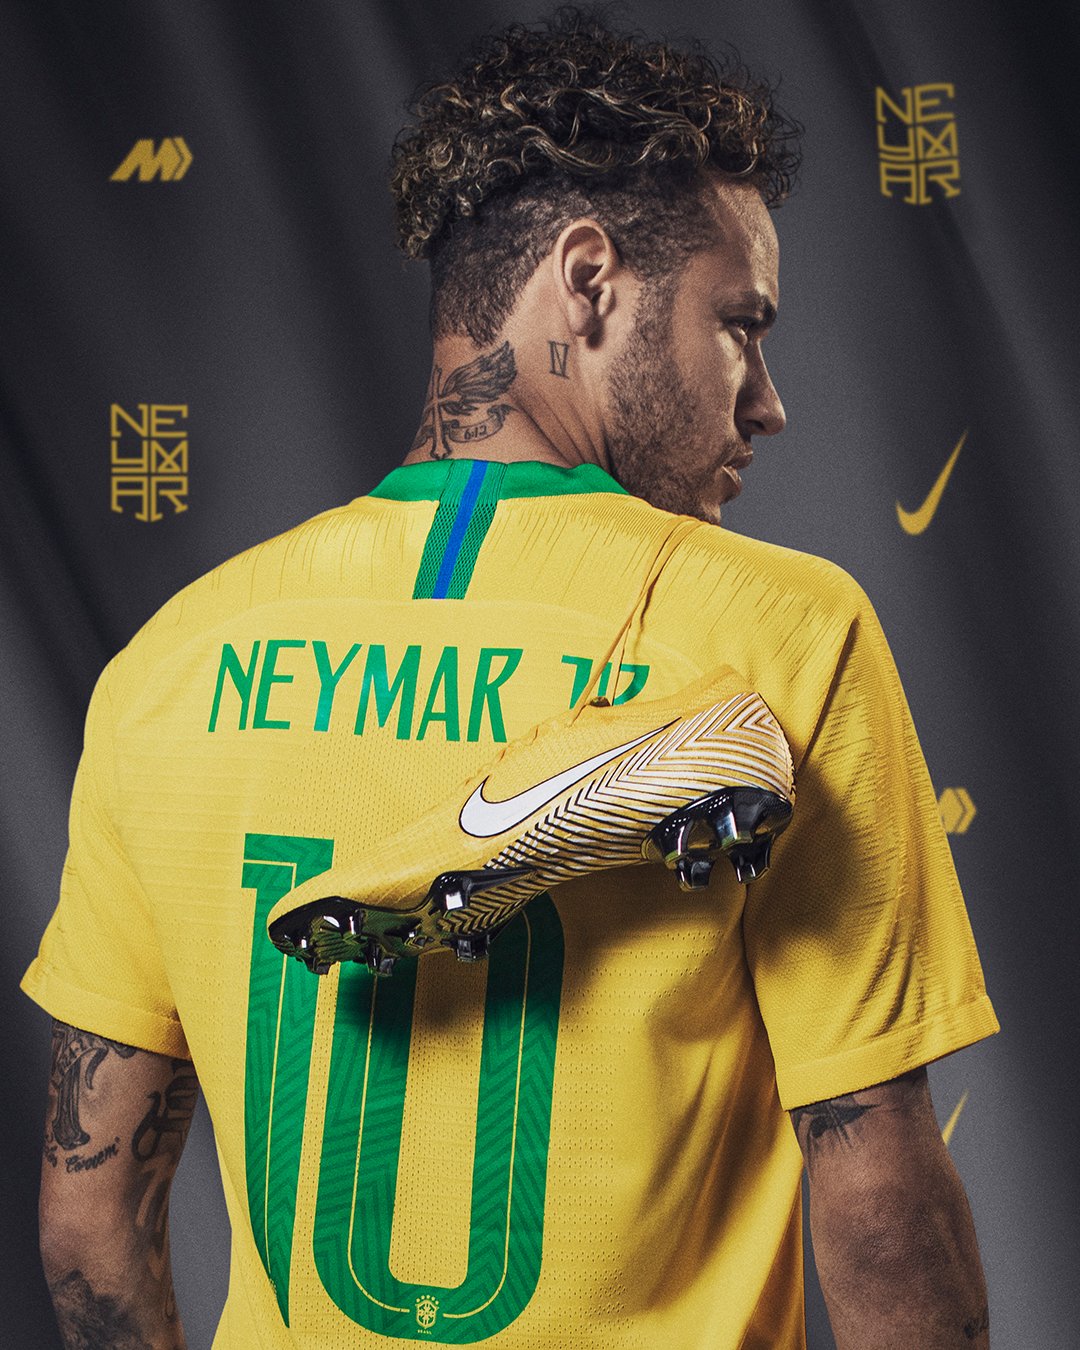 Nike Football on X: "All that matters is your game. @neymarjr ⠀ Introducing  the new NJR “Meu Jogo” Mercurial Vapor 360, inspired by Neymar Jr's  unrivalled belief and unique style of play.